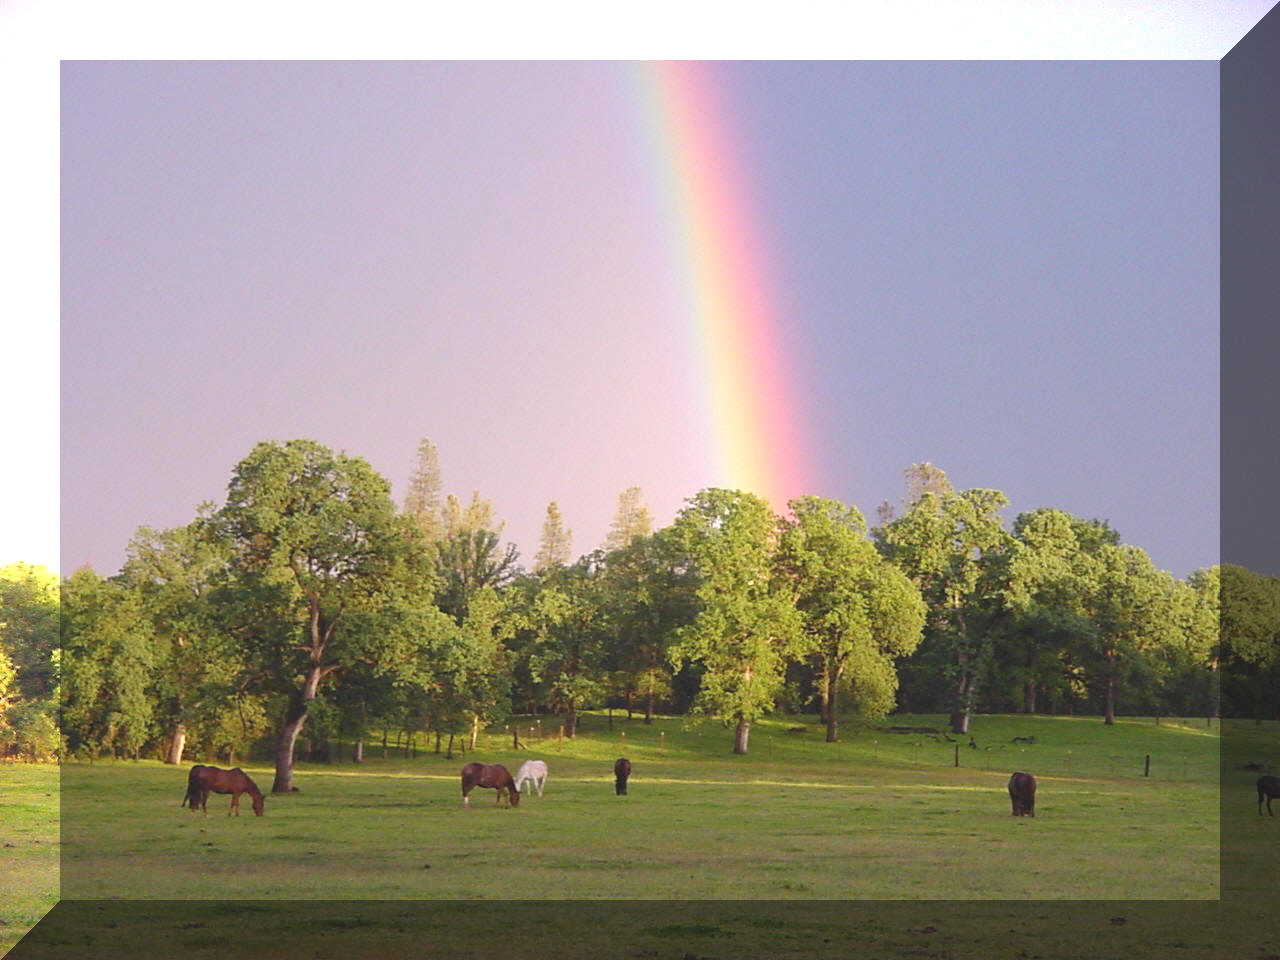 At the end of the rainbow - is the Flying H Ranch